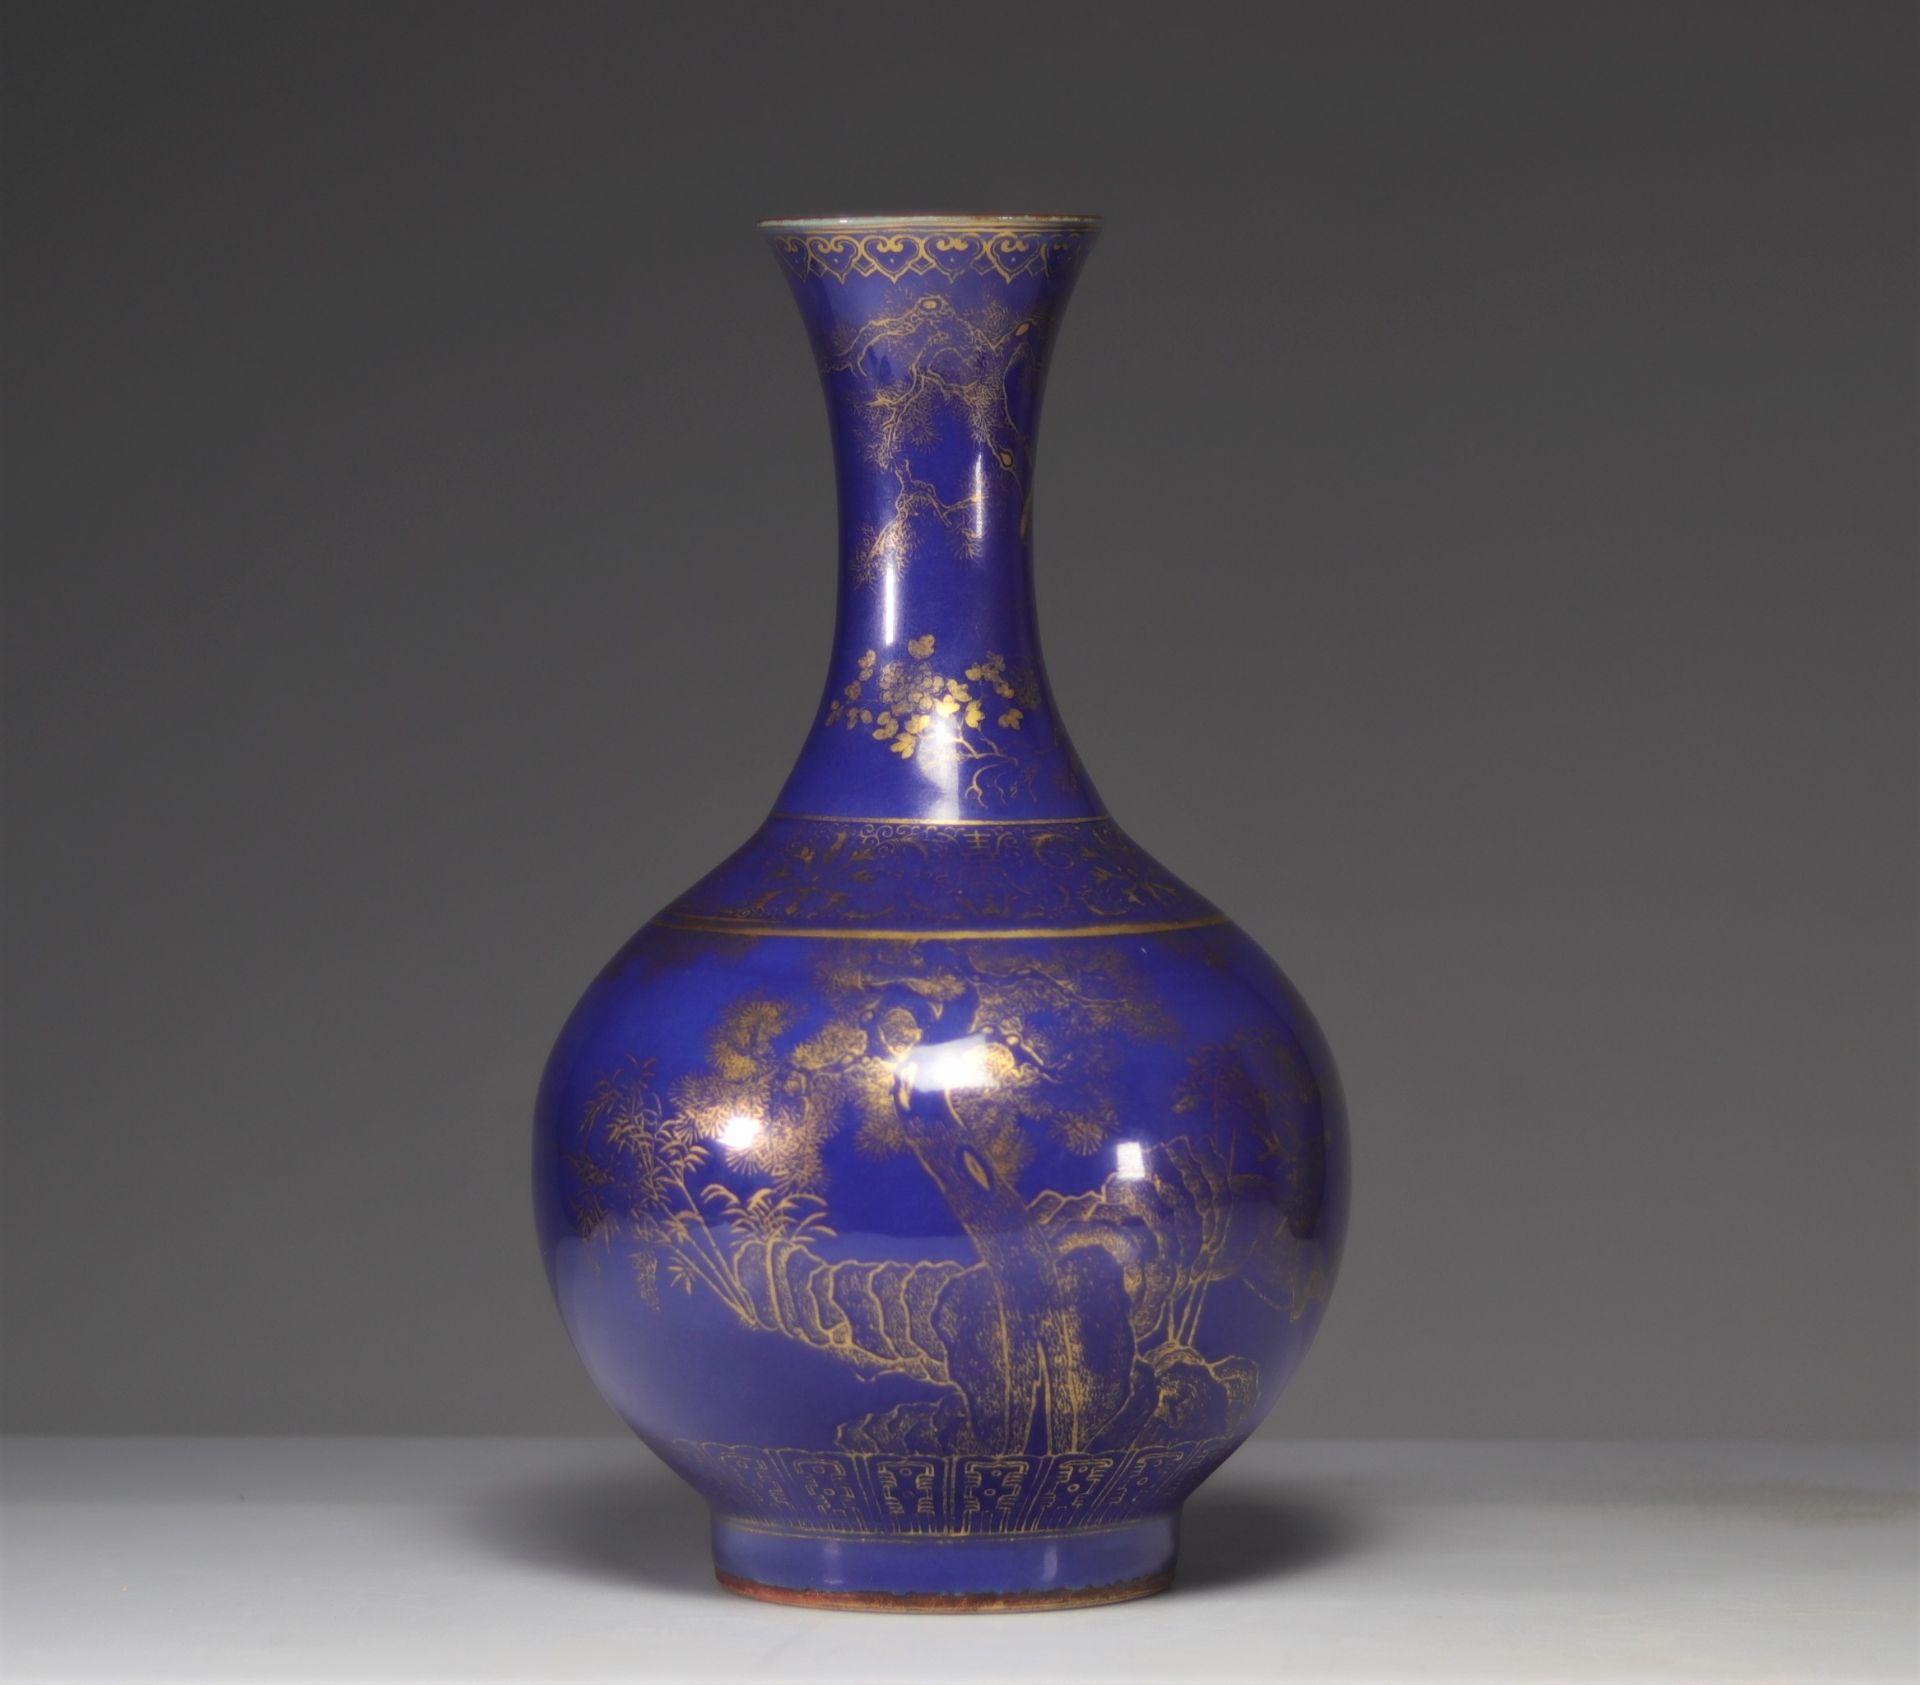 Rare Chinese porcelain vase powdered blue and gilt decoration with deers mark under the piece - Image 5 of 7